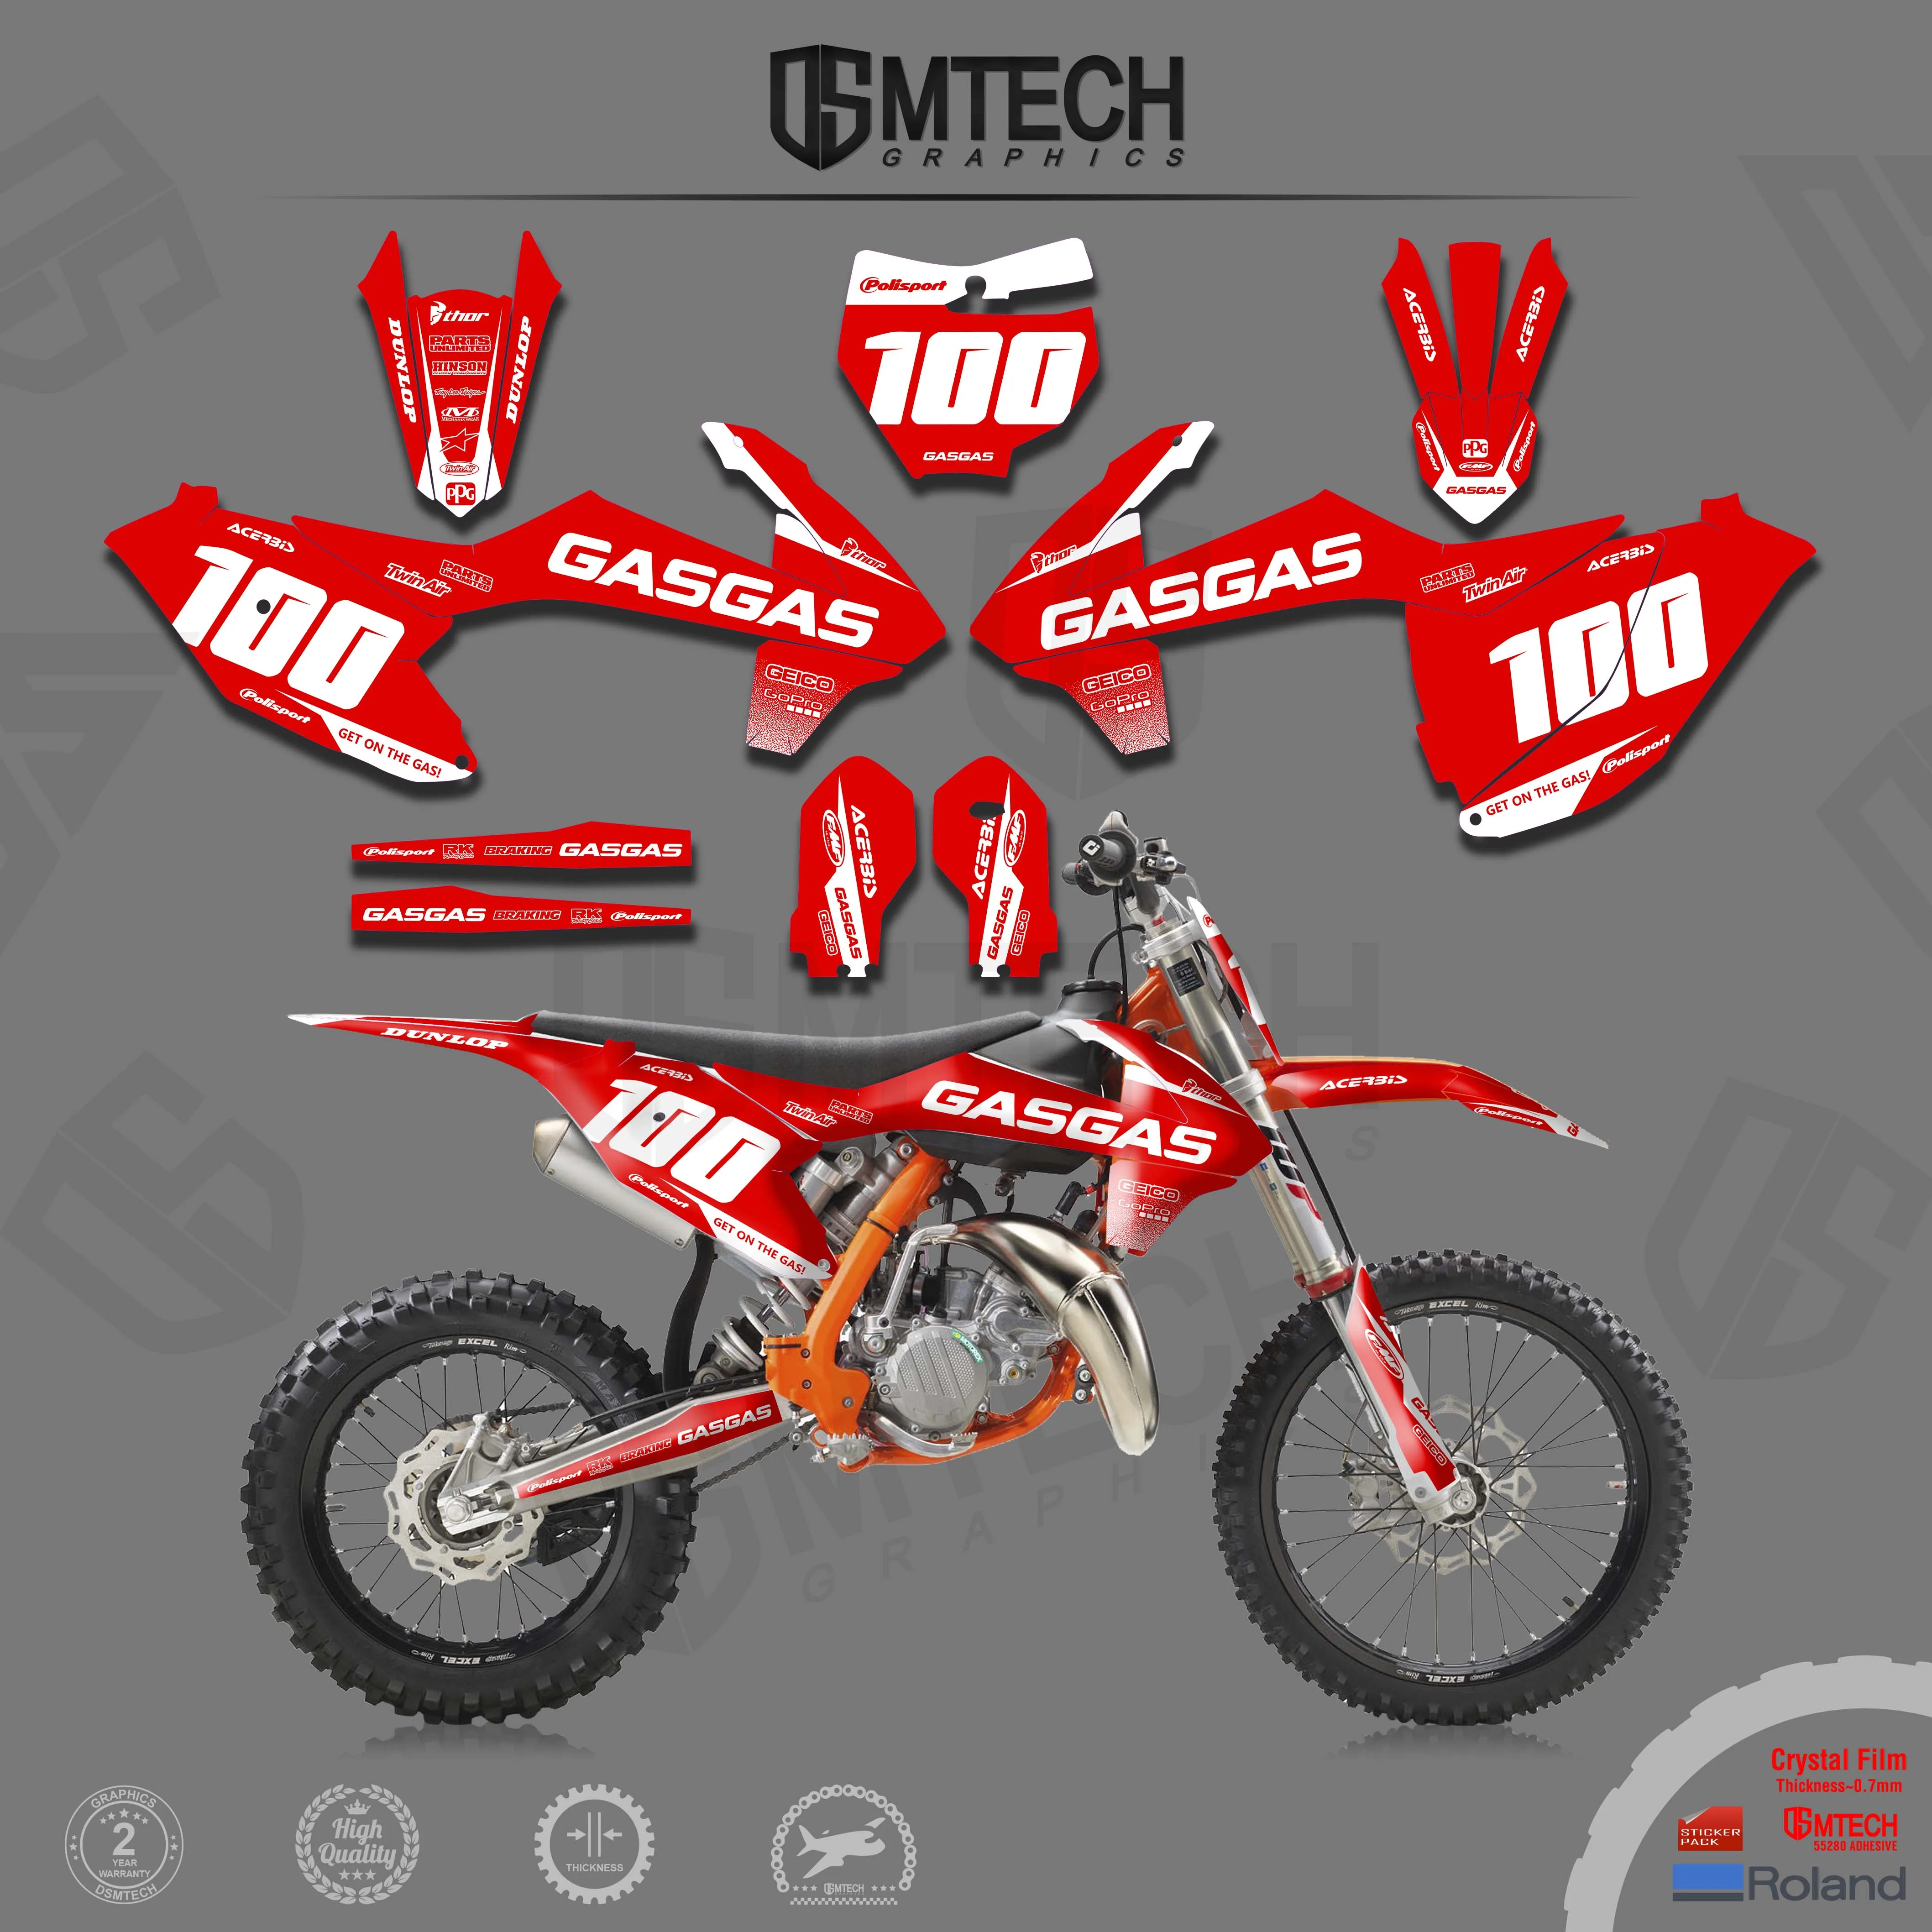 DSMTECH Team Motorcycle Sticker Graphic Decal Kit For GASGAS MC85 2021 Decals Stickers